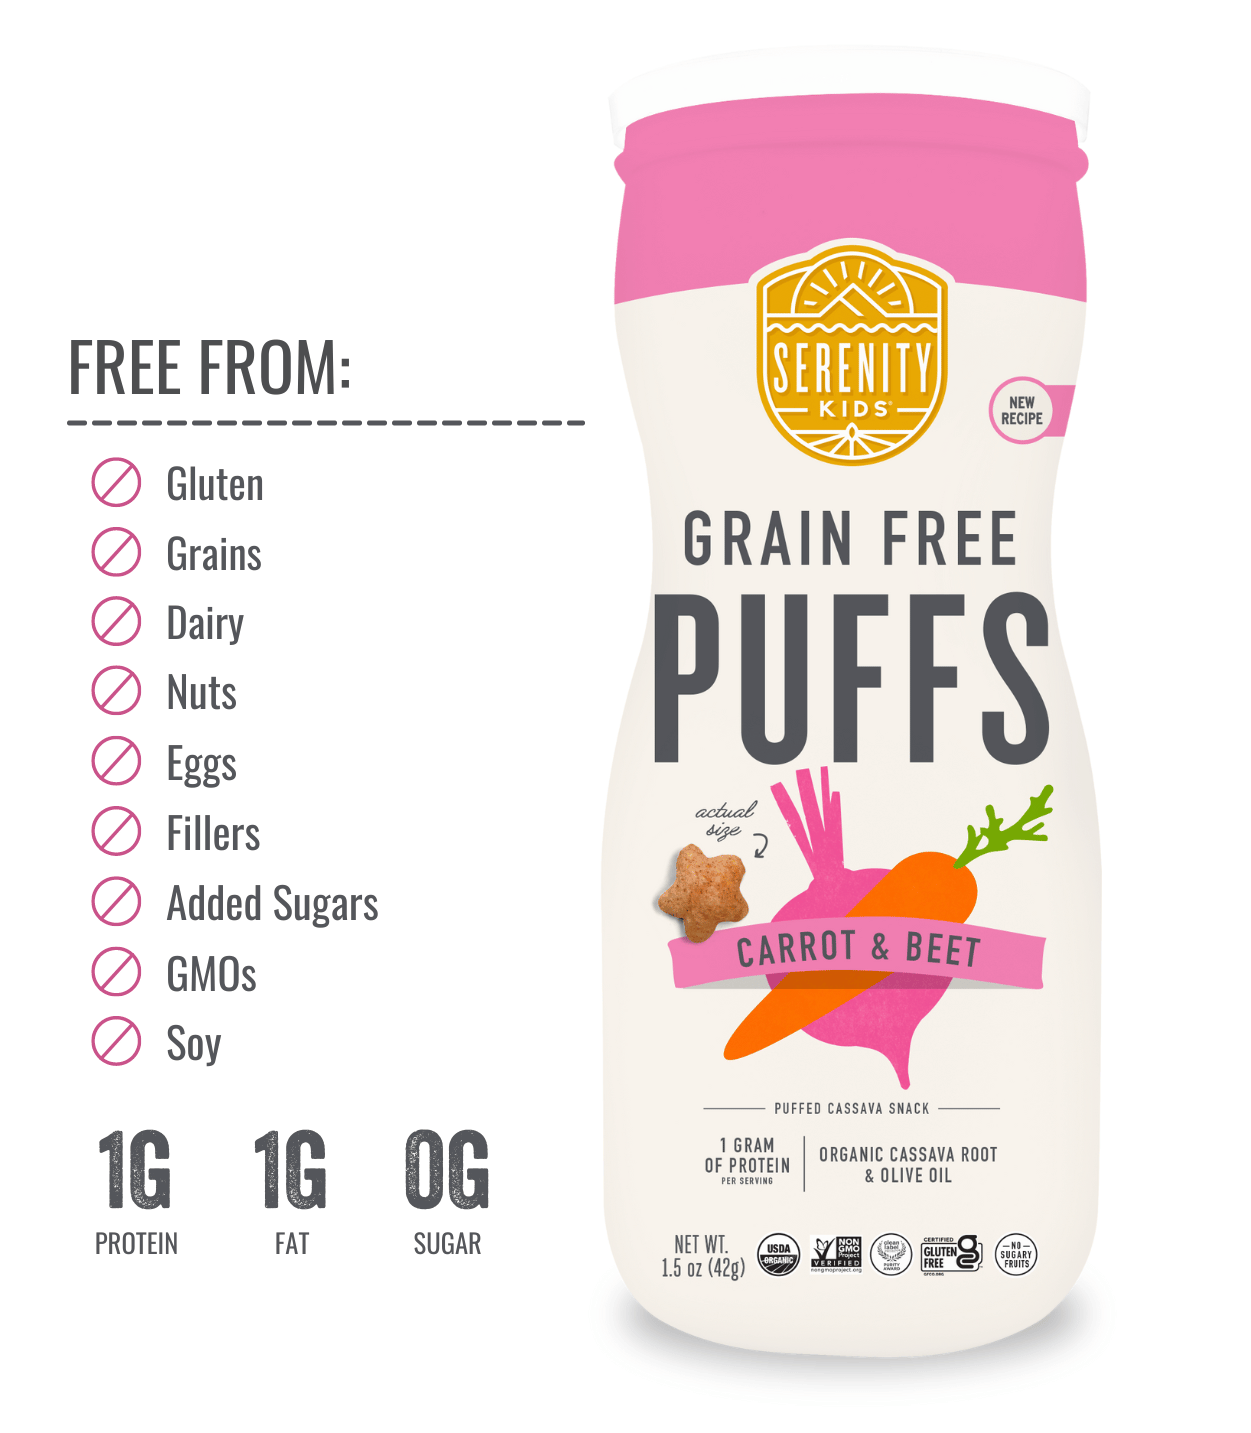 Carrot & Beet Grain Free Baby Puffs with Olive Oil